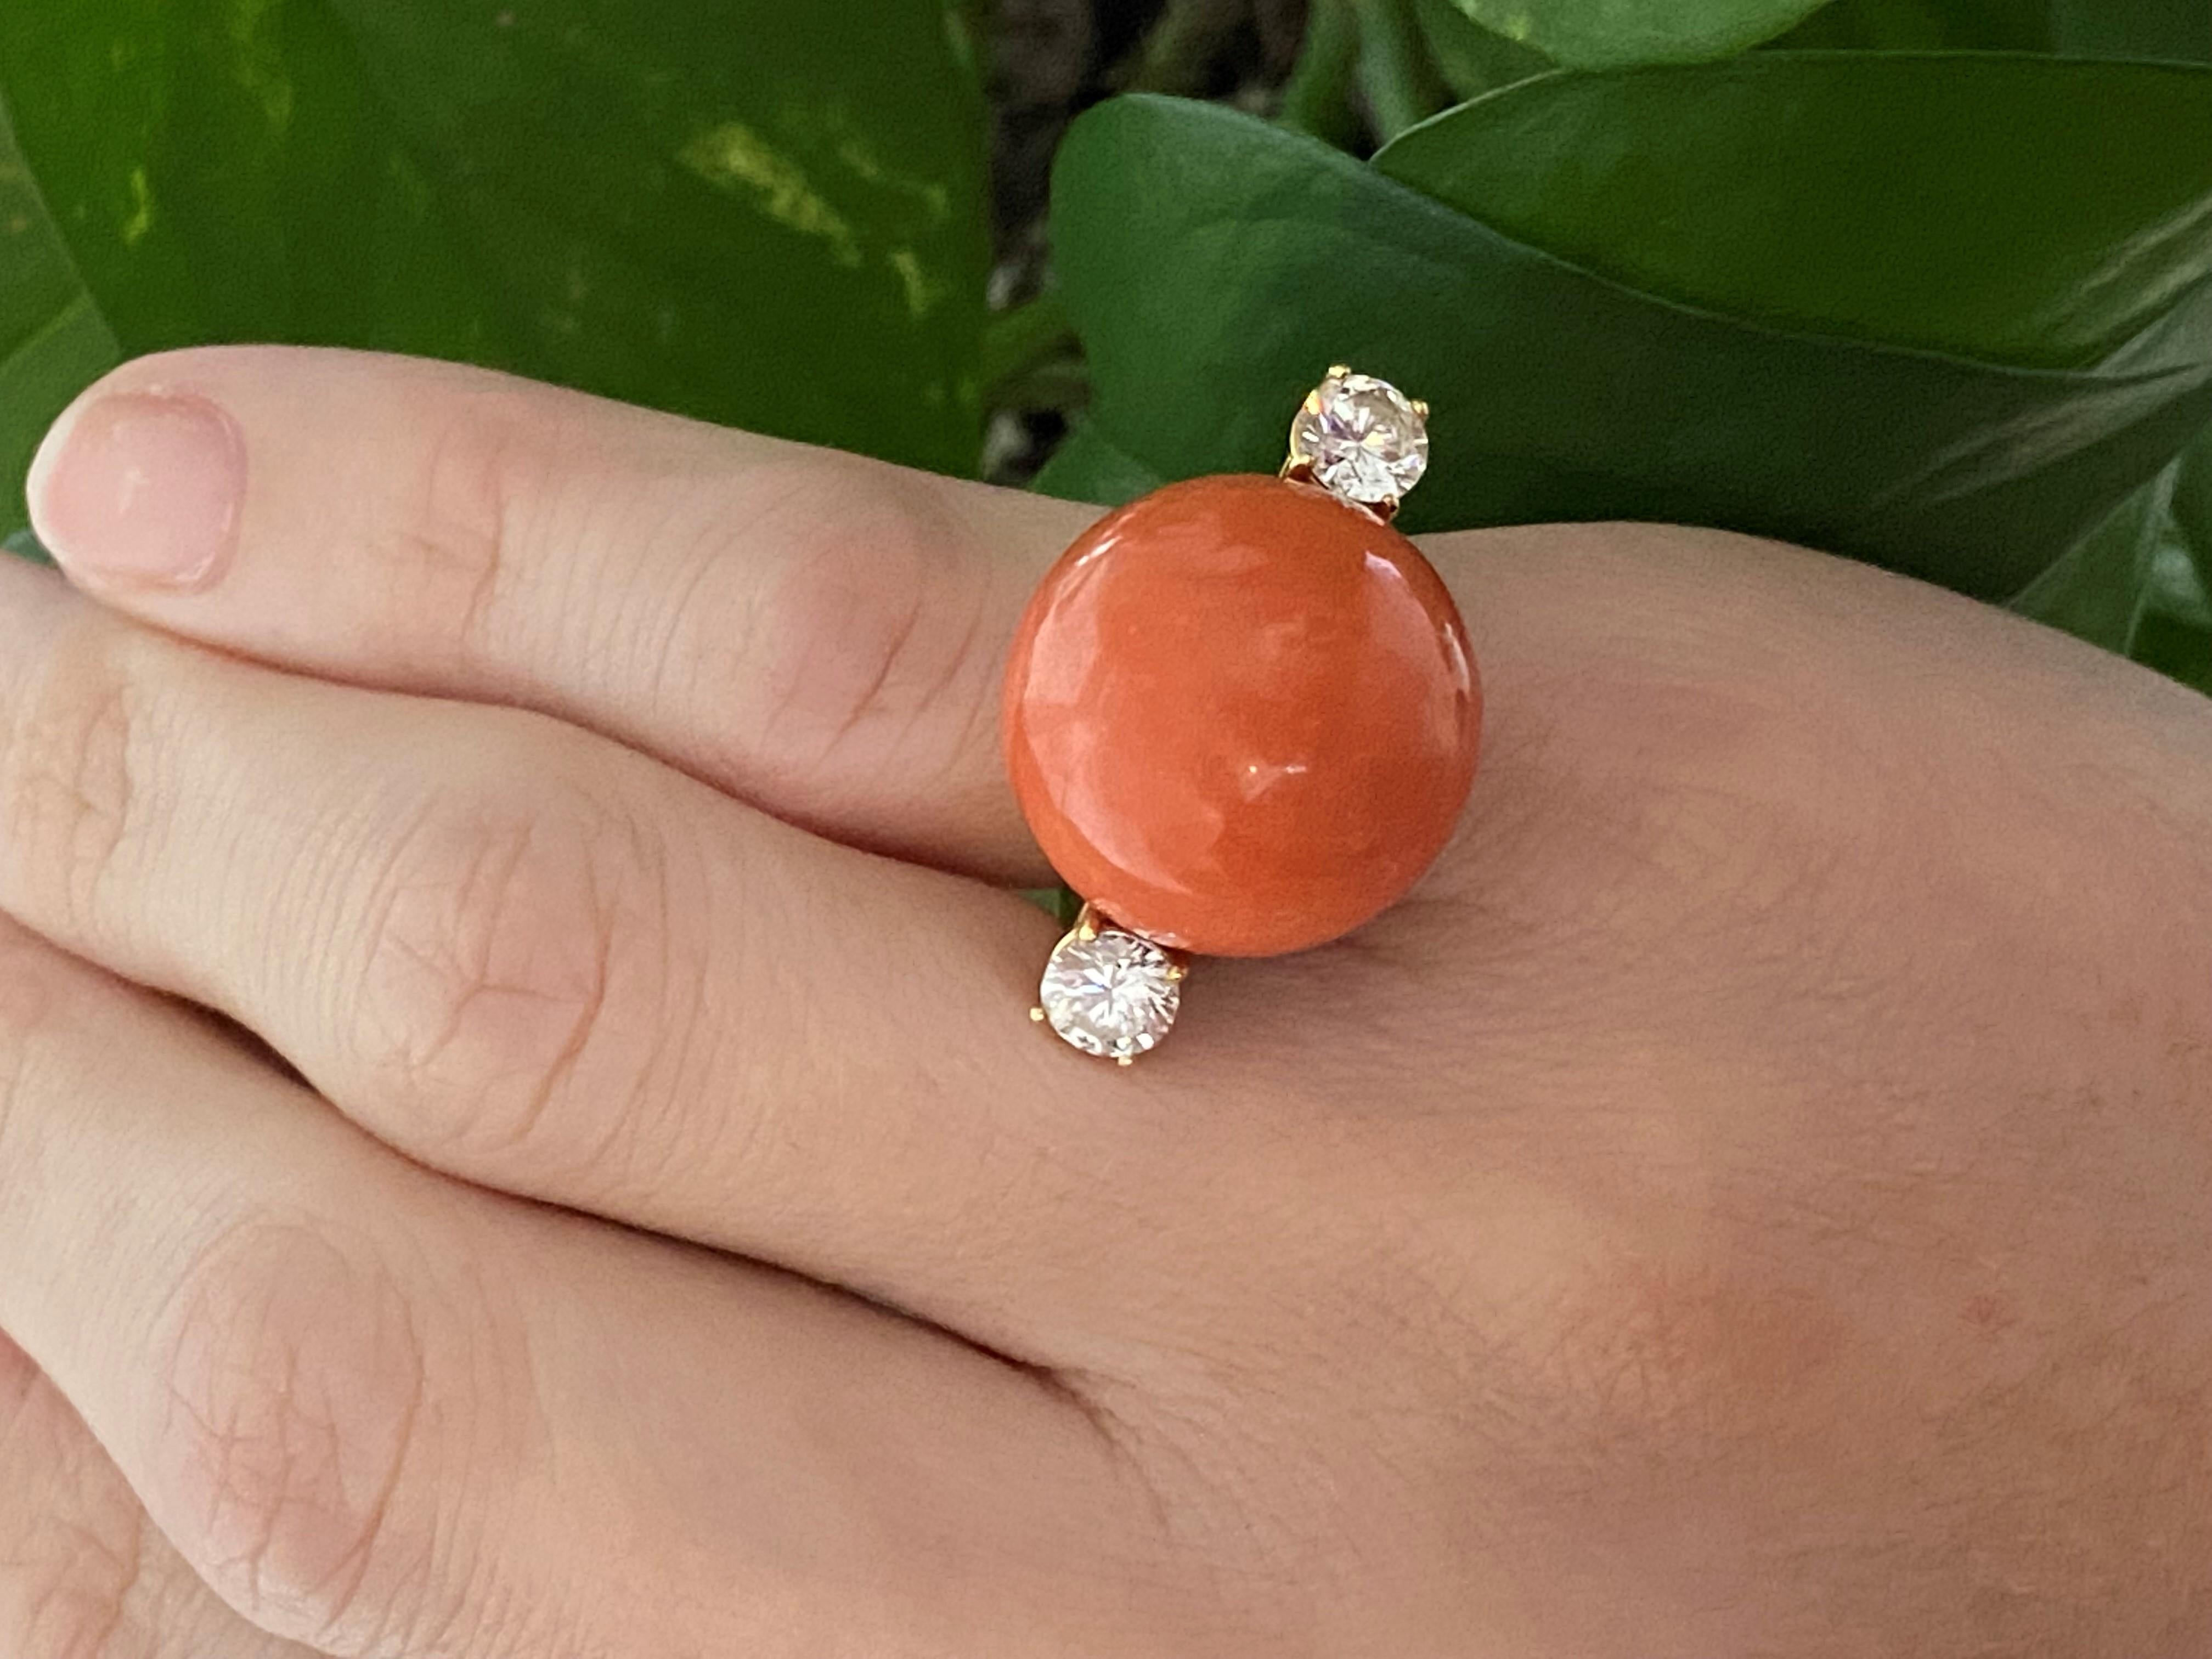 Retro Modernist 1970 Italian Cocktail Ring In 18Kt Gold 27.17 Ctw In Diamonds & Coral For Sale